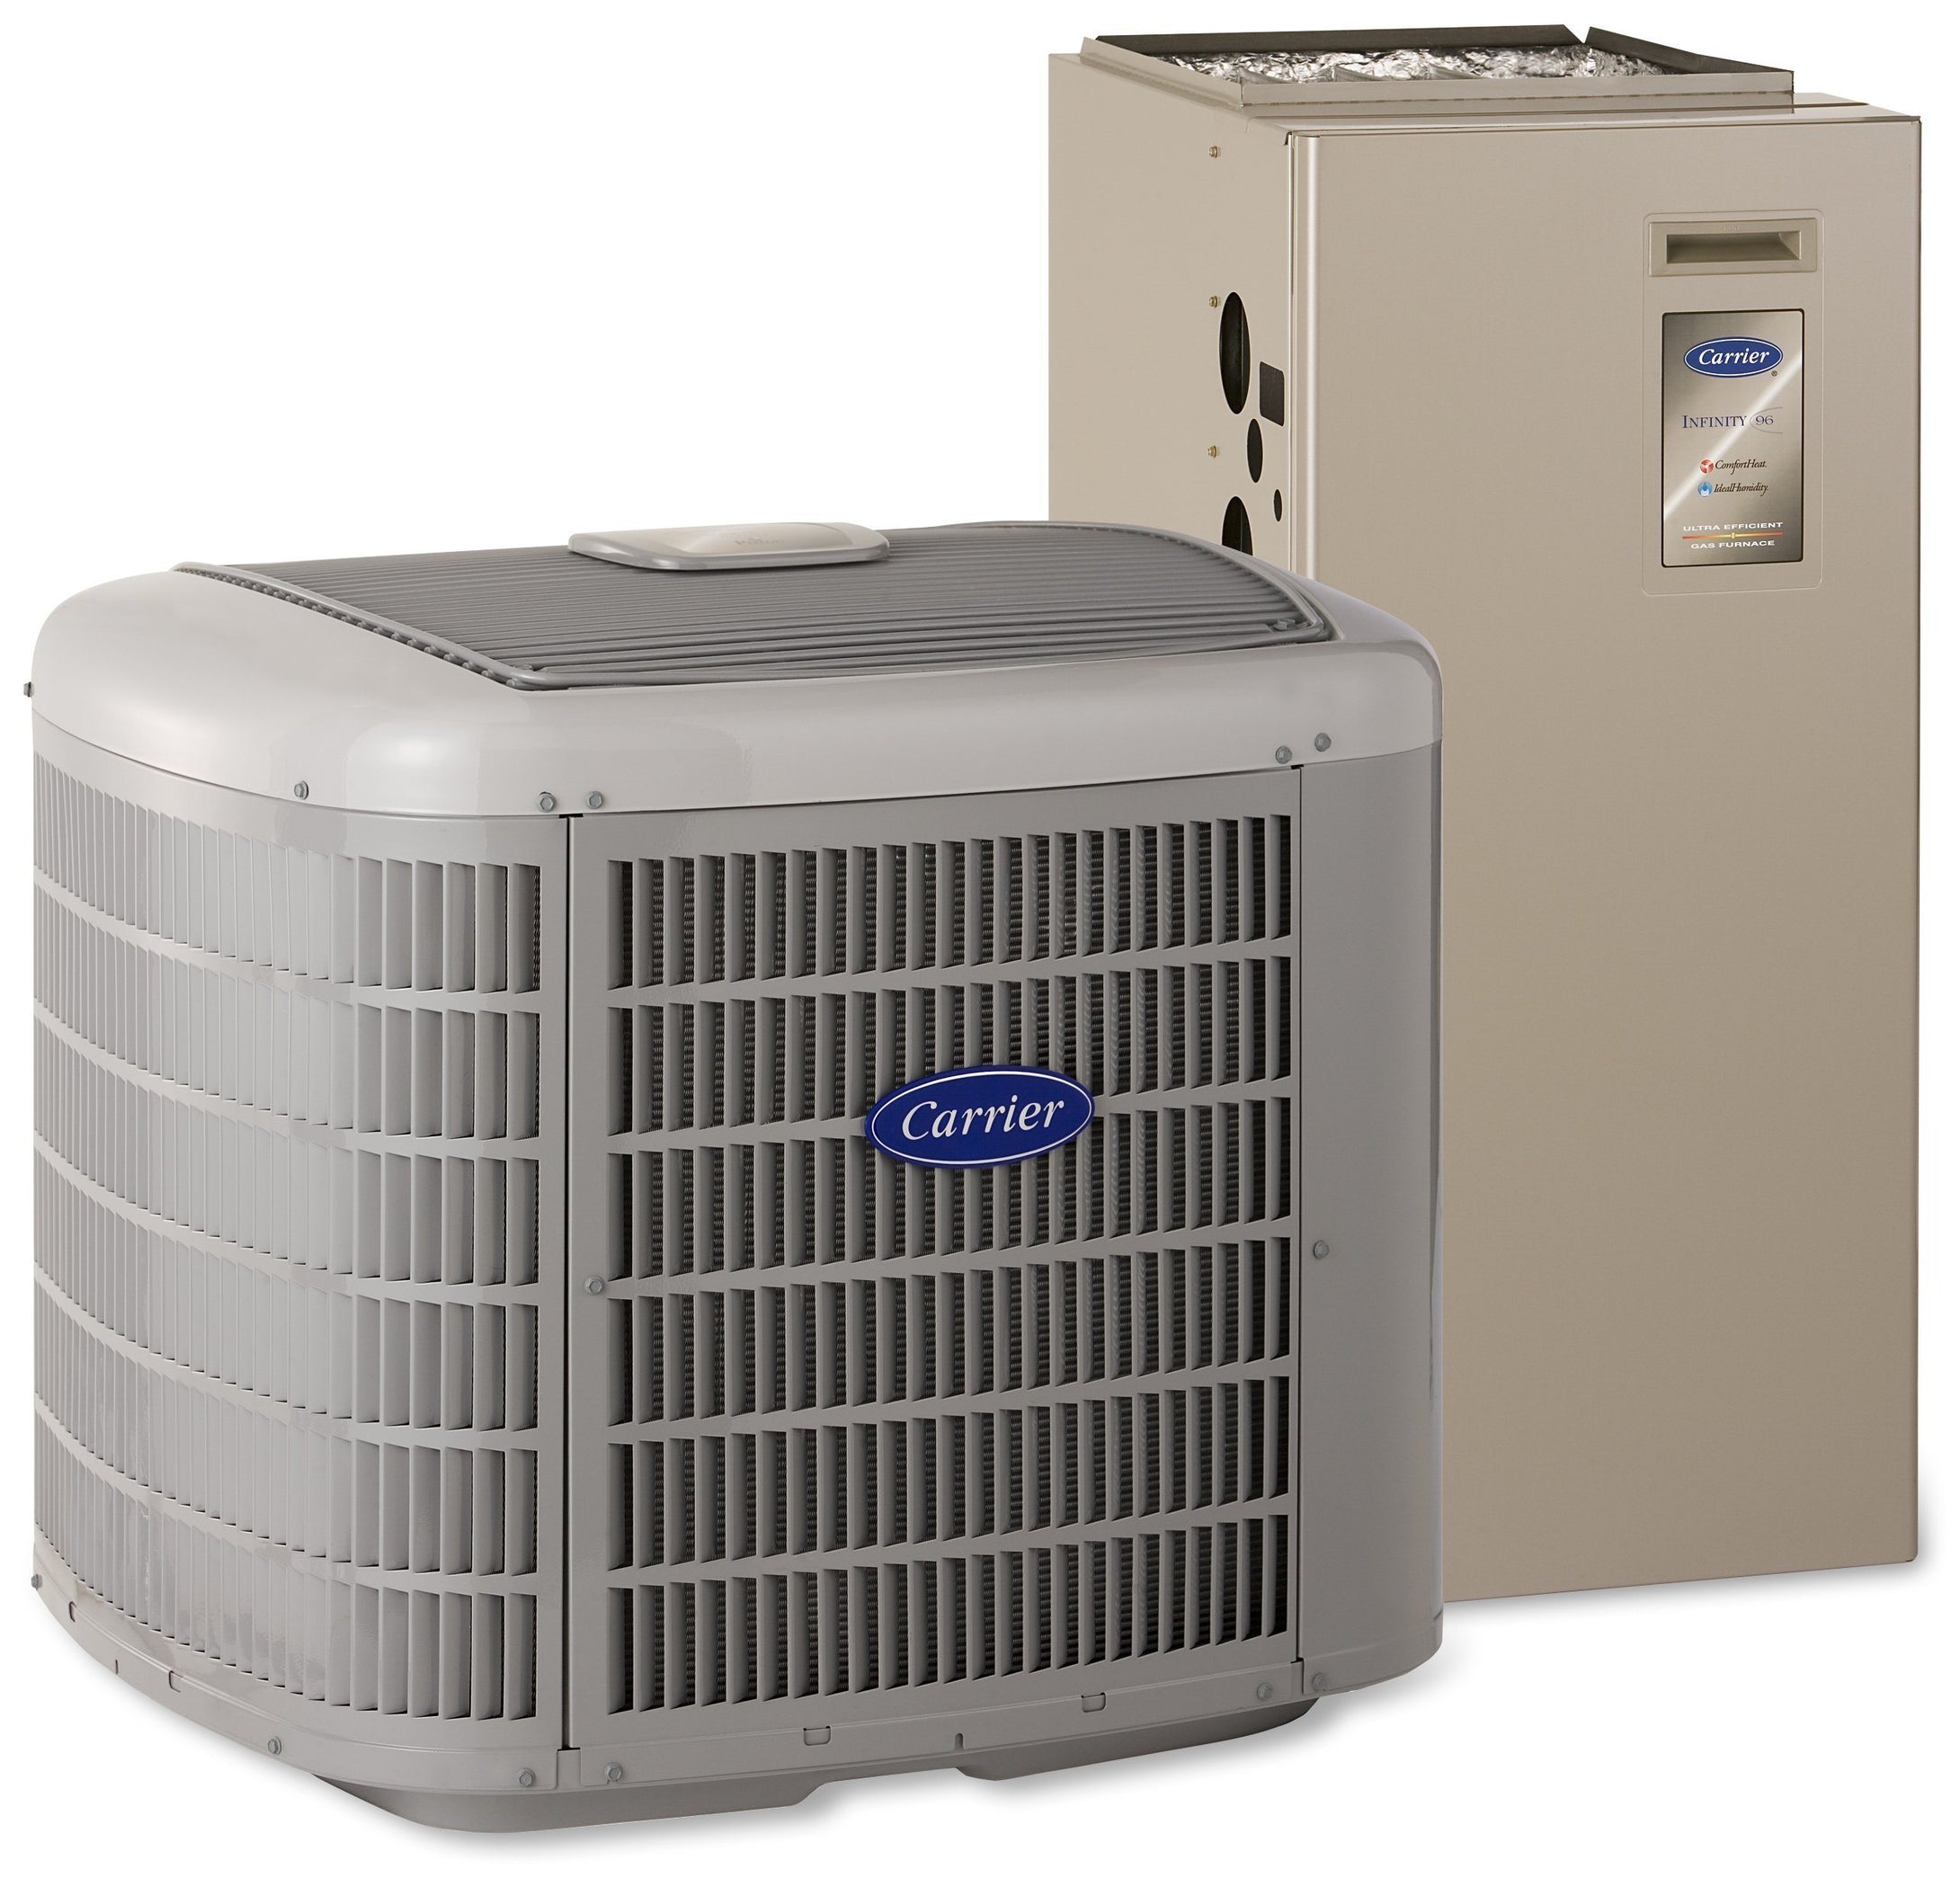 graco-snugride-35-weight-of-carrier-carrier-2-ton-heat-pump